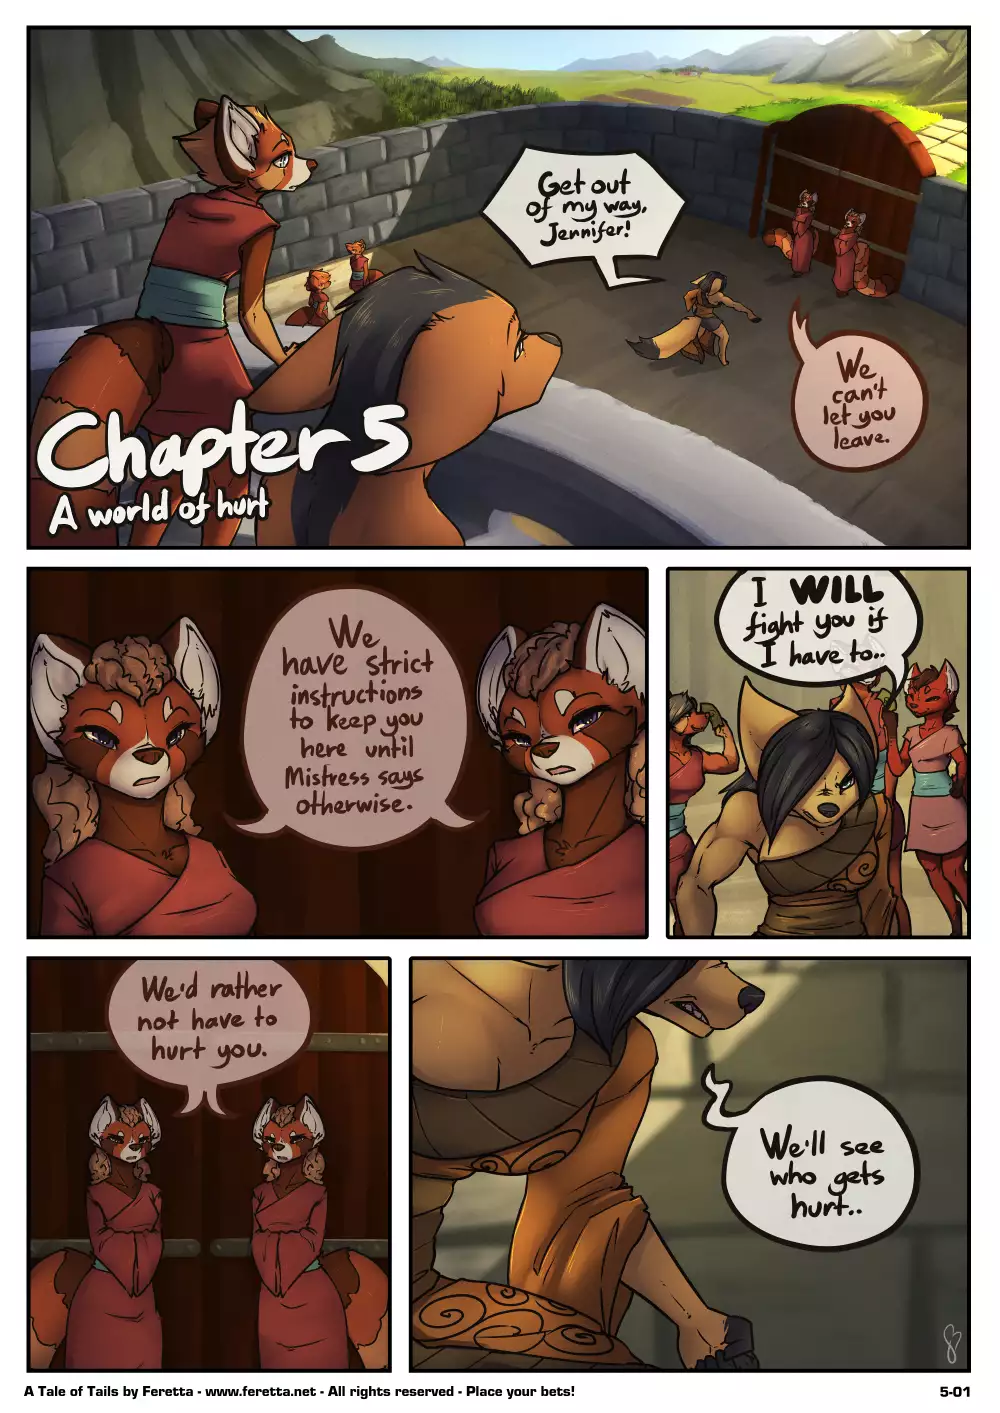 A Tale of Tails - Chapter 5 1